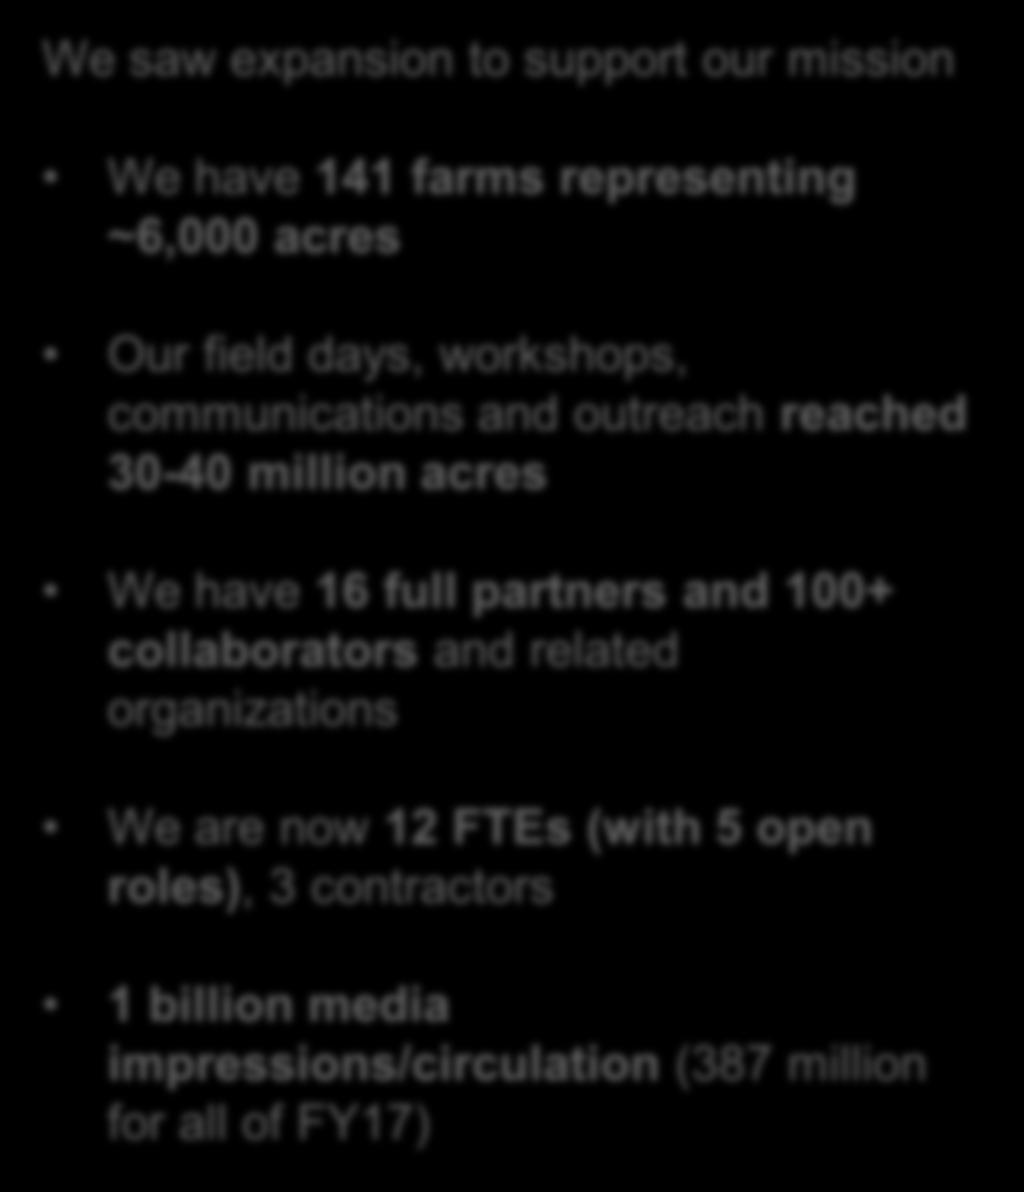 A snapshot of SHP in 2018 We saw expansion to support our mission We have 141 farms representing ~6,000 acres Our field days, workshops, communications and outreach reached 30-40 million acres We